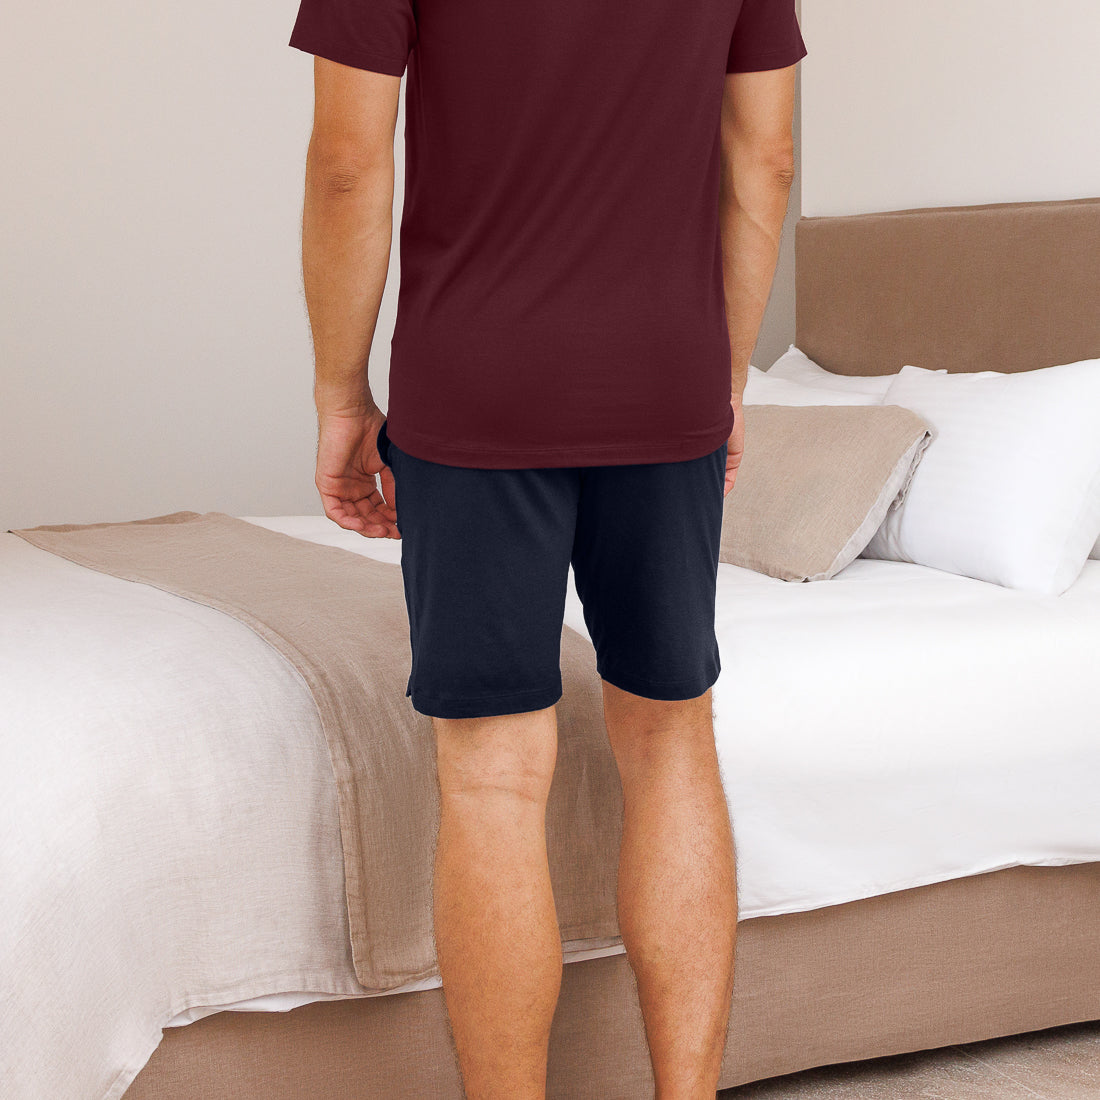 Muscle recovery sleep shorts men || Navy